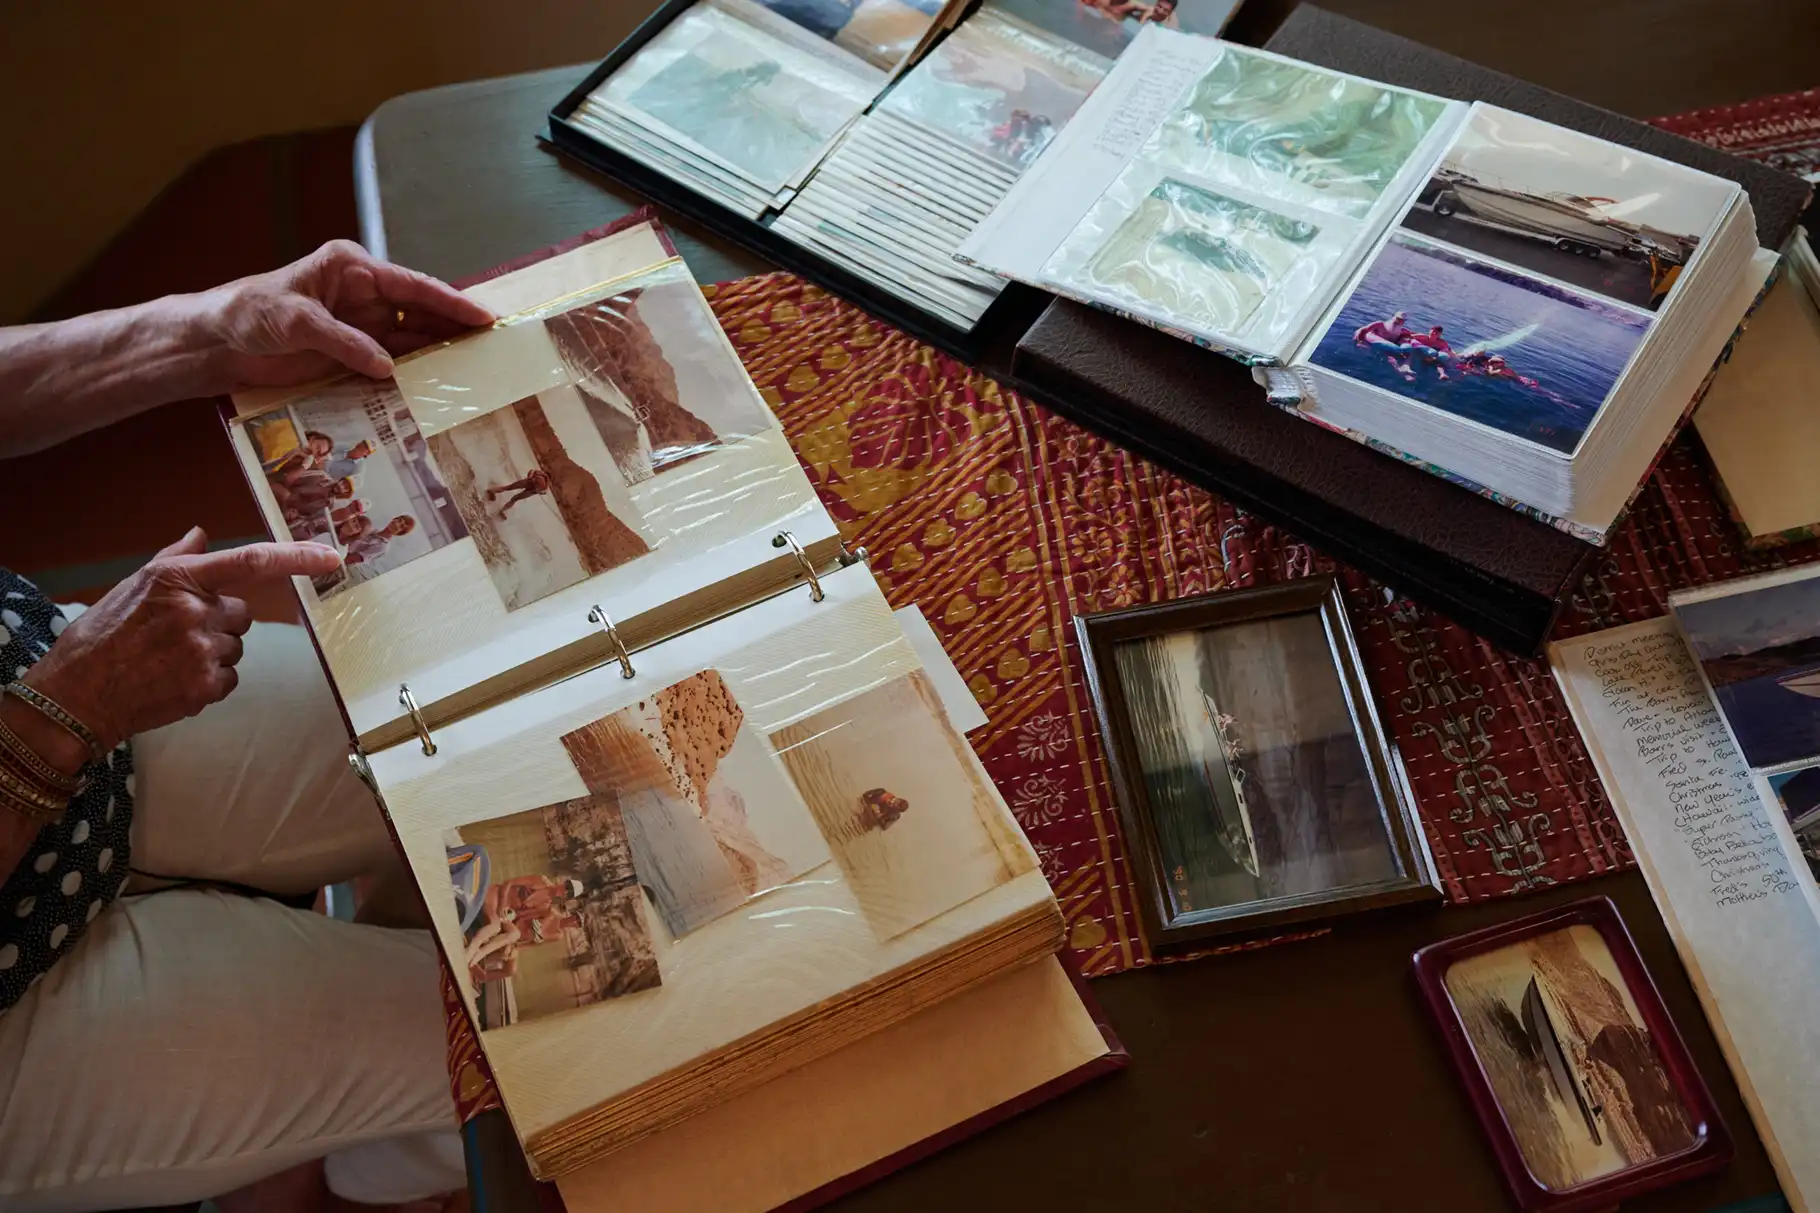 DiManno flips through browning photo albums that hold memories of years spent at Lake Mead.